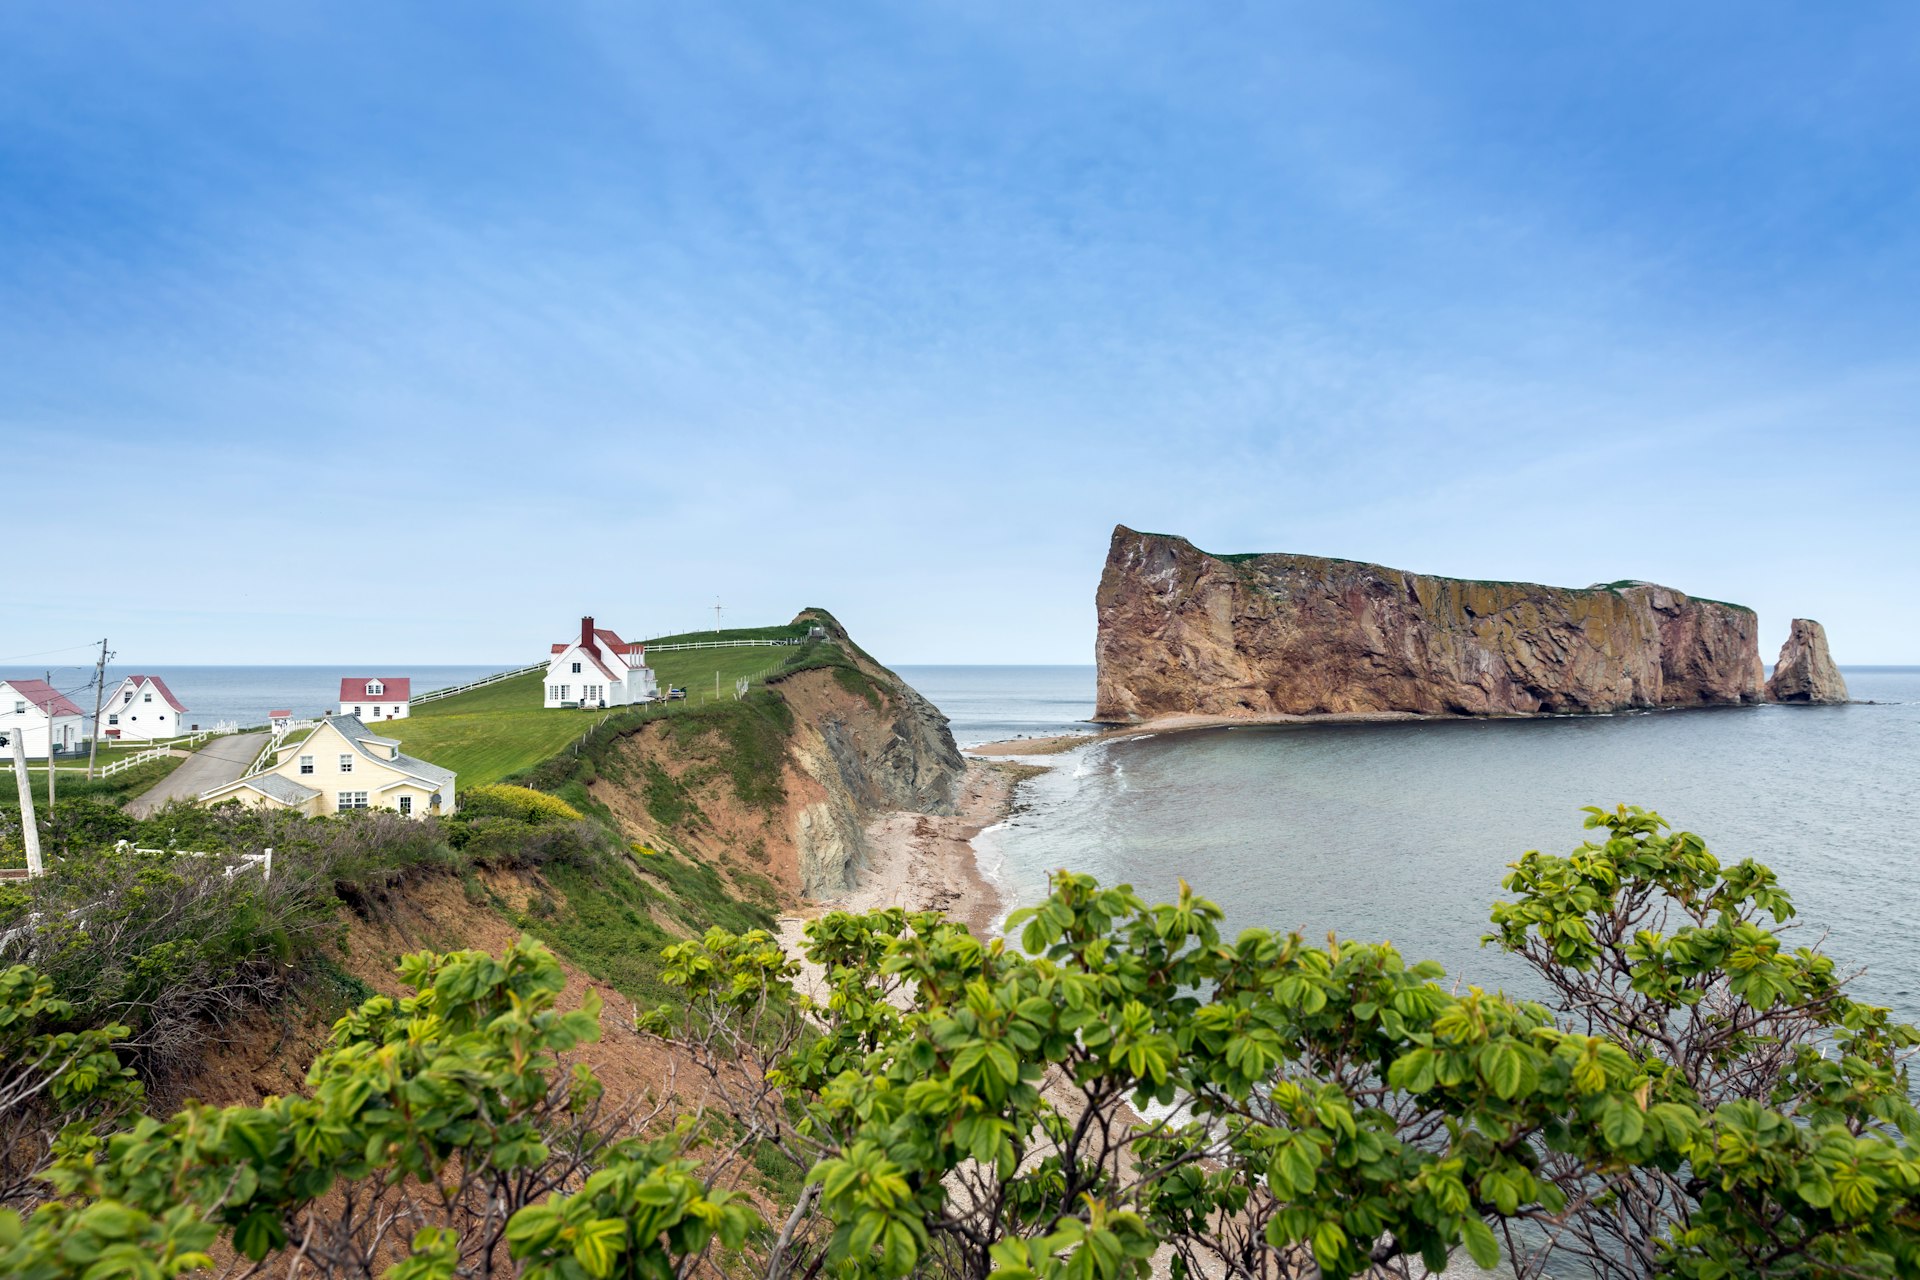 Rocher Perce, a sheer rock formation at the tip of the Gaspe Peninsula in Quebec, Canada